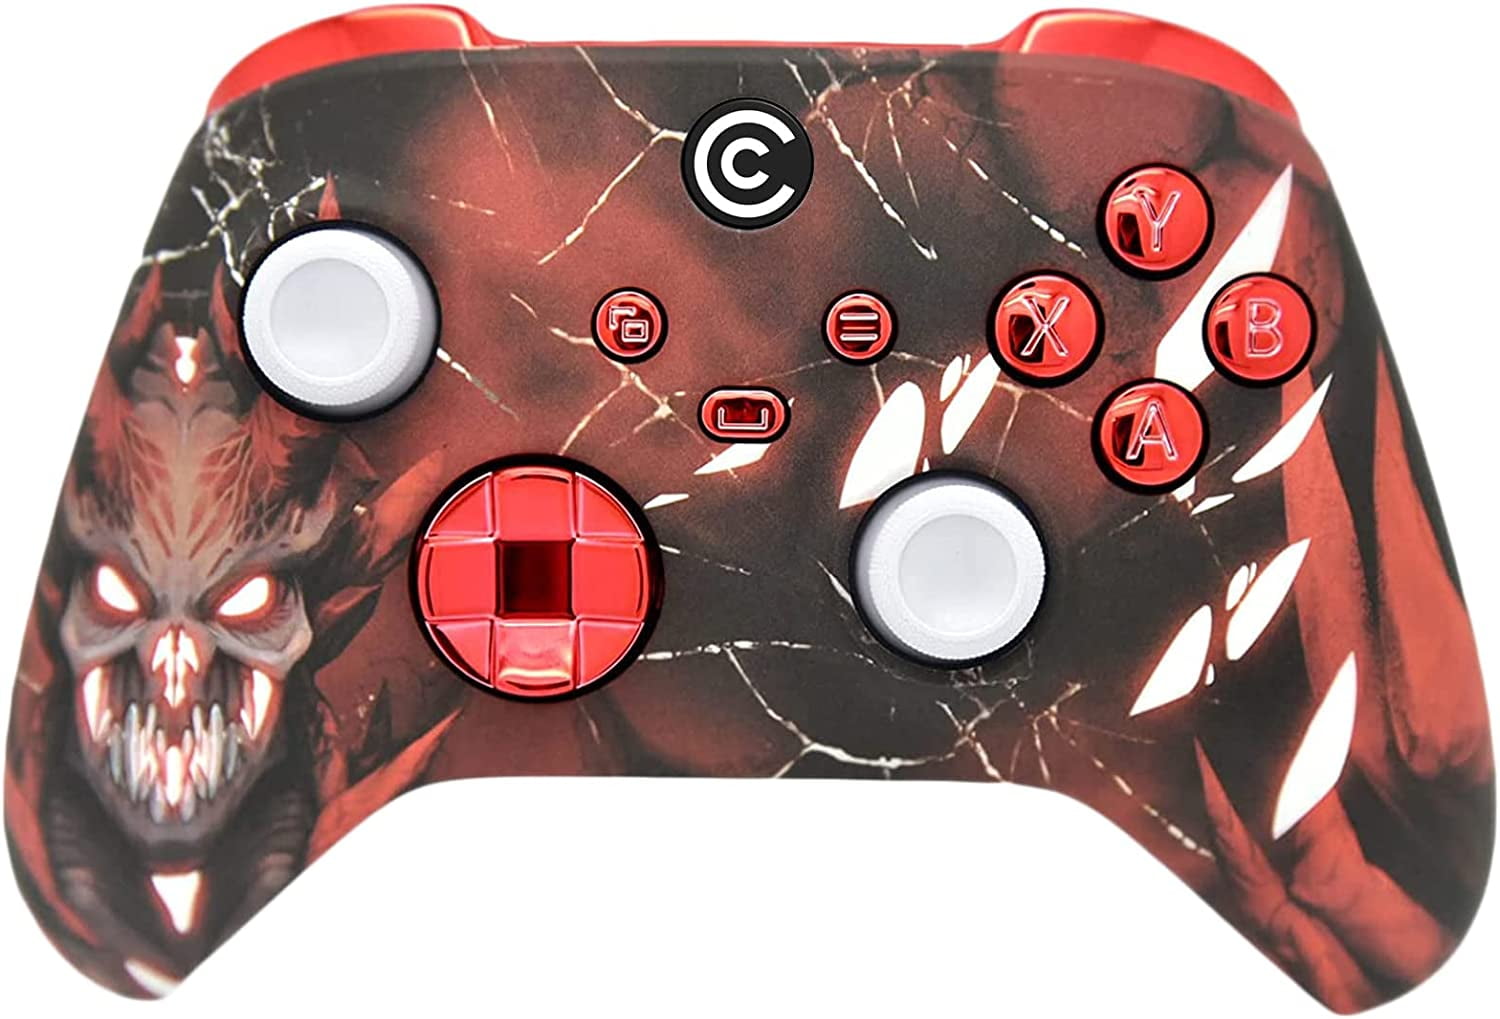  Custom Controllerzz Elite Series 2 Controller Compatible With  Xbox One, Xbox Series S and Xbox Series X (Red) : Video Games